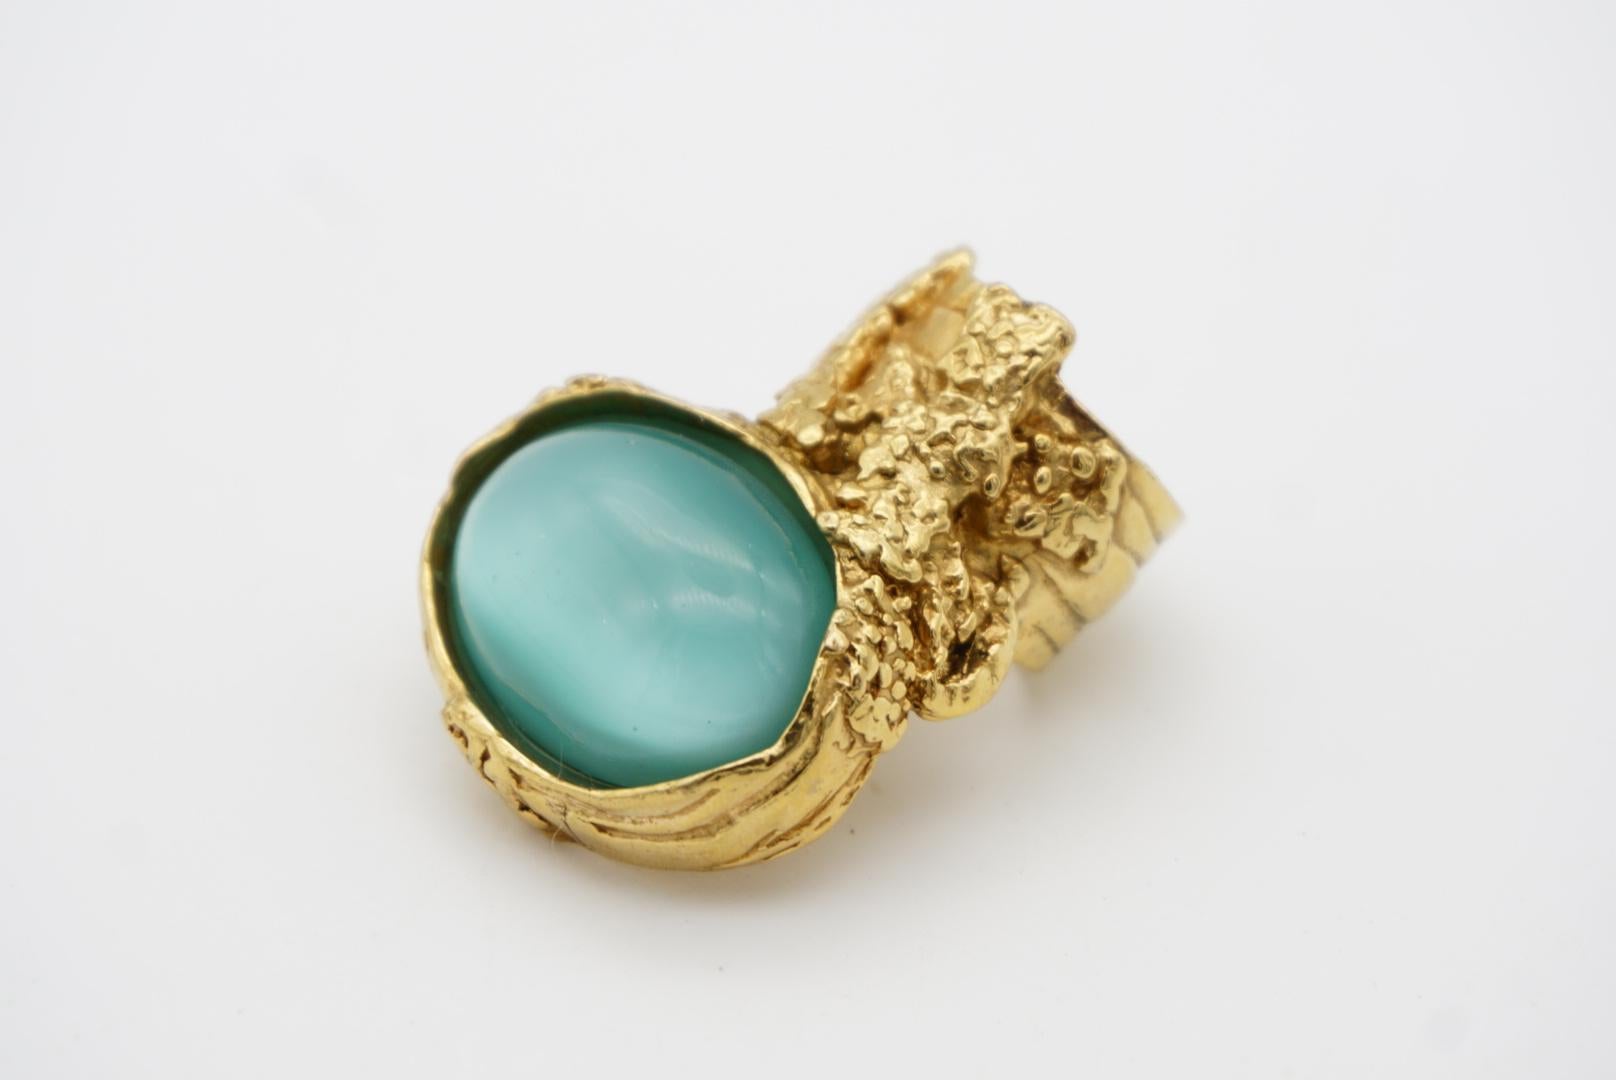 Yves Saint Laurent YSL Arty Clear Soft Green Cabochon Statement Ring, Size 6 In Excellent Condition For Sale In Wokingham, England